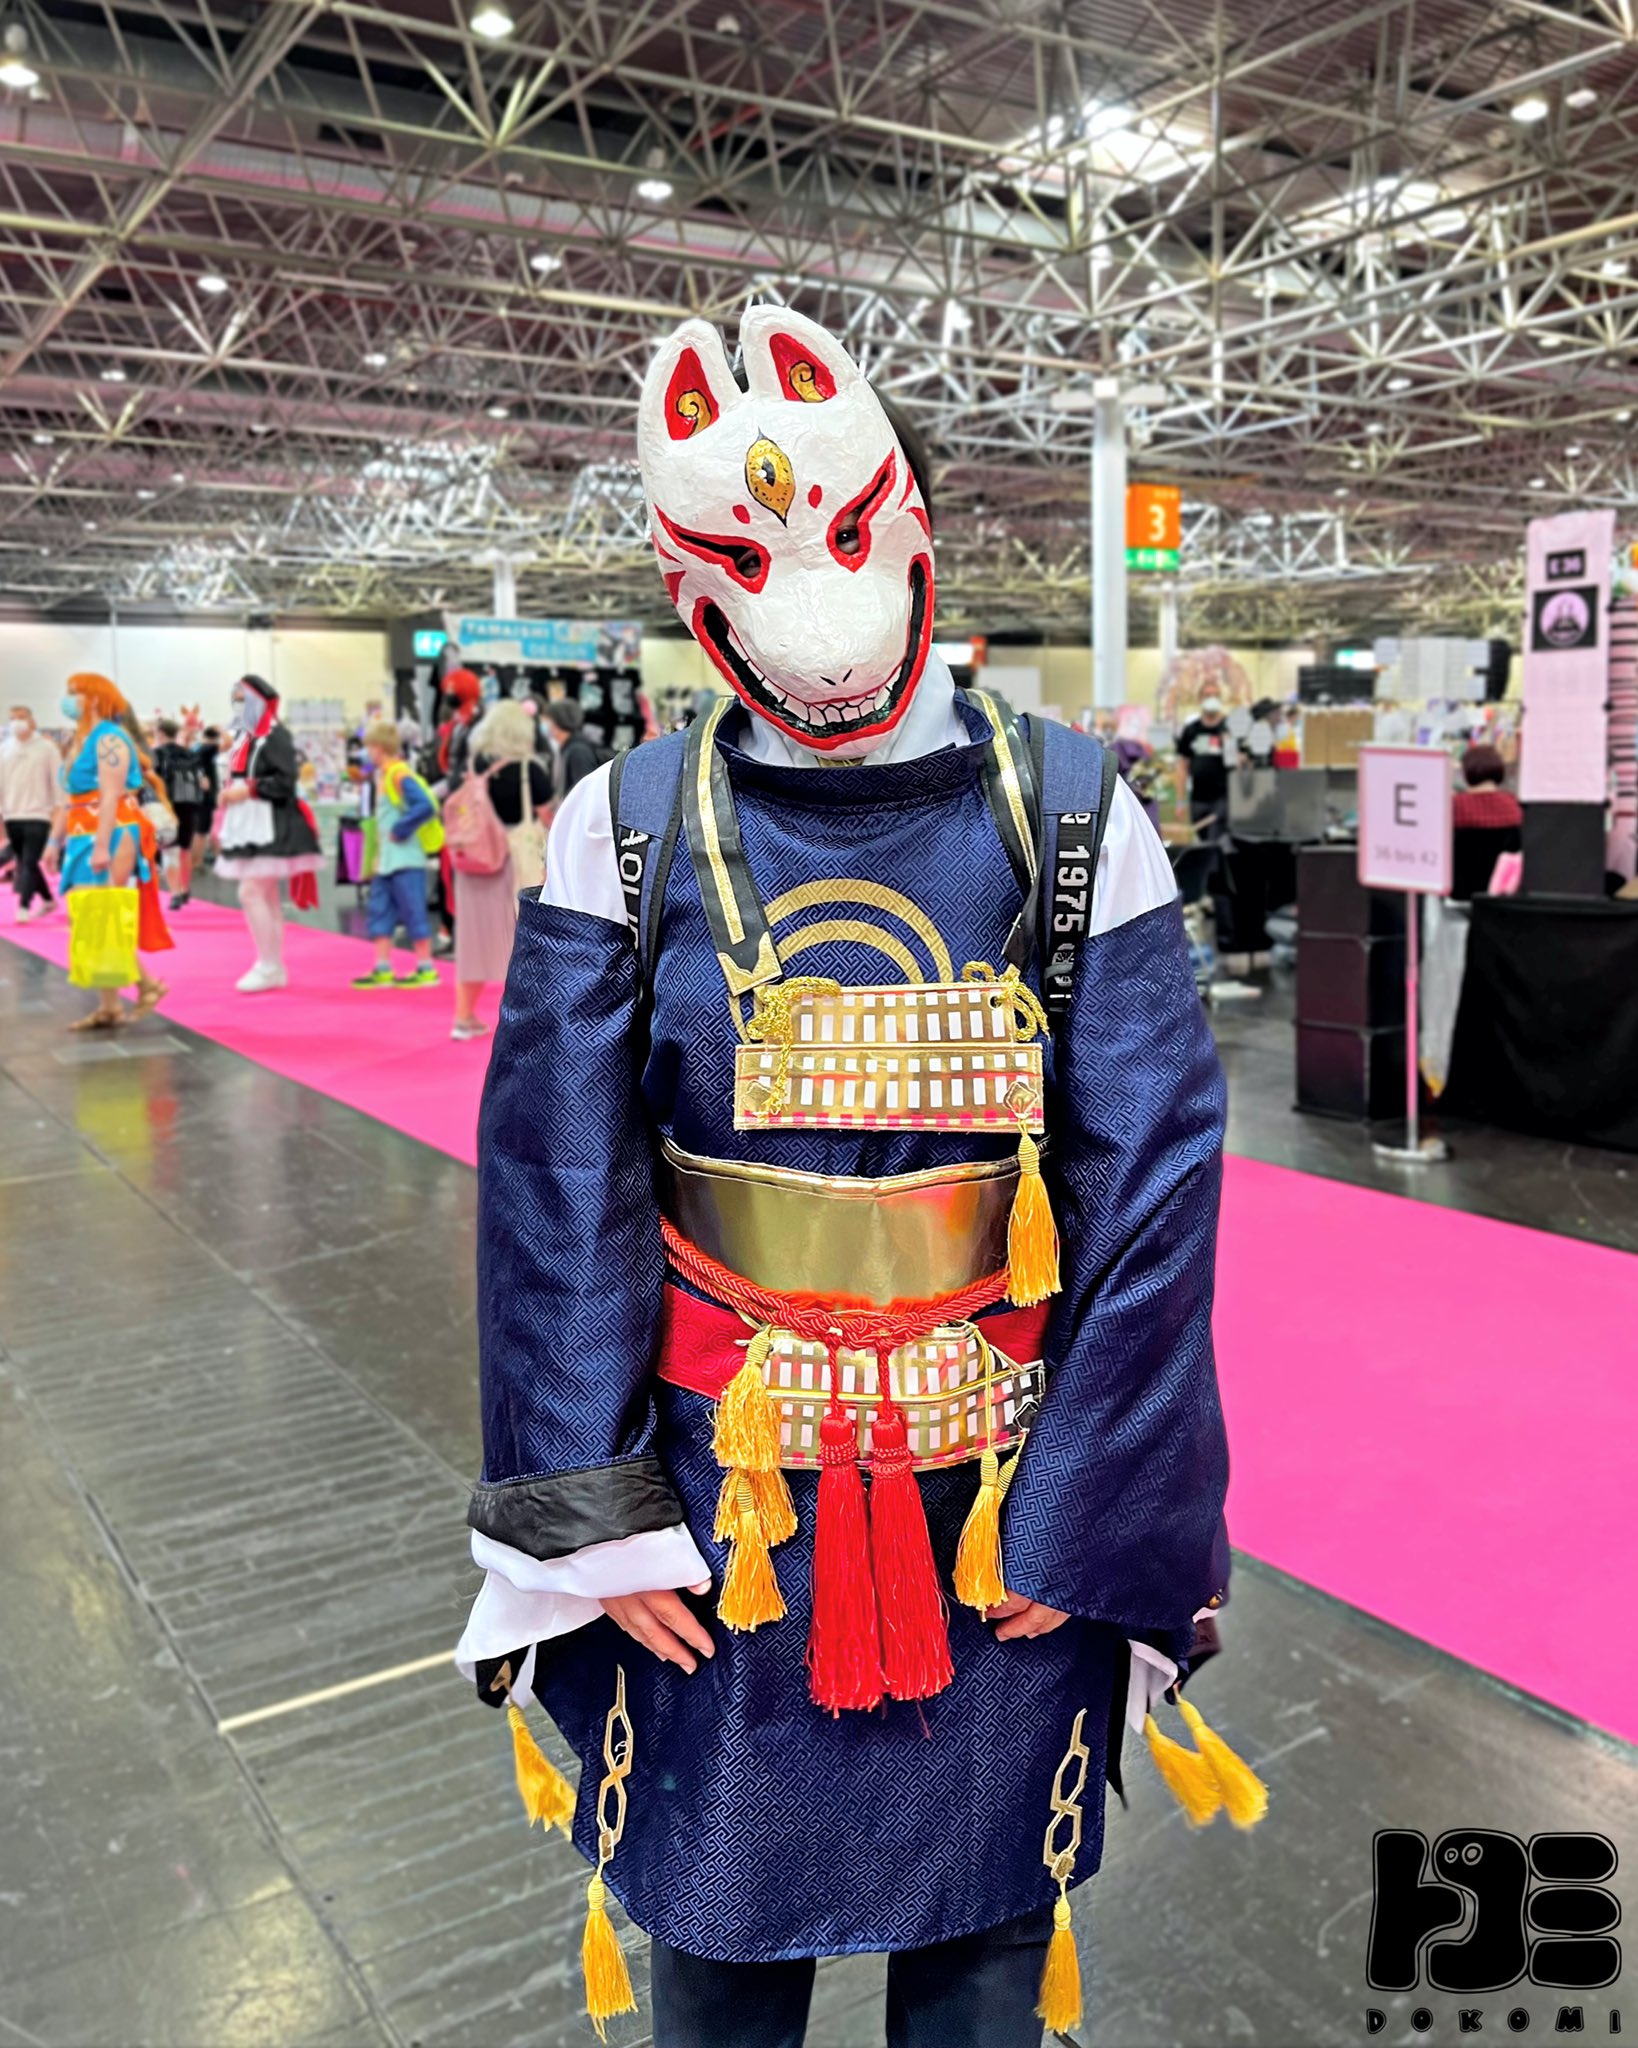 DoKomi auf Twitter: „#dokomi2021 cosplay moments ✨ We can't help but fall  in love with the craftsmanship and creativity of our visitors!  https://t.co/HqQ5fqAtFu“ / Twitter